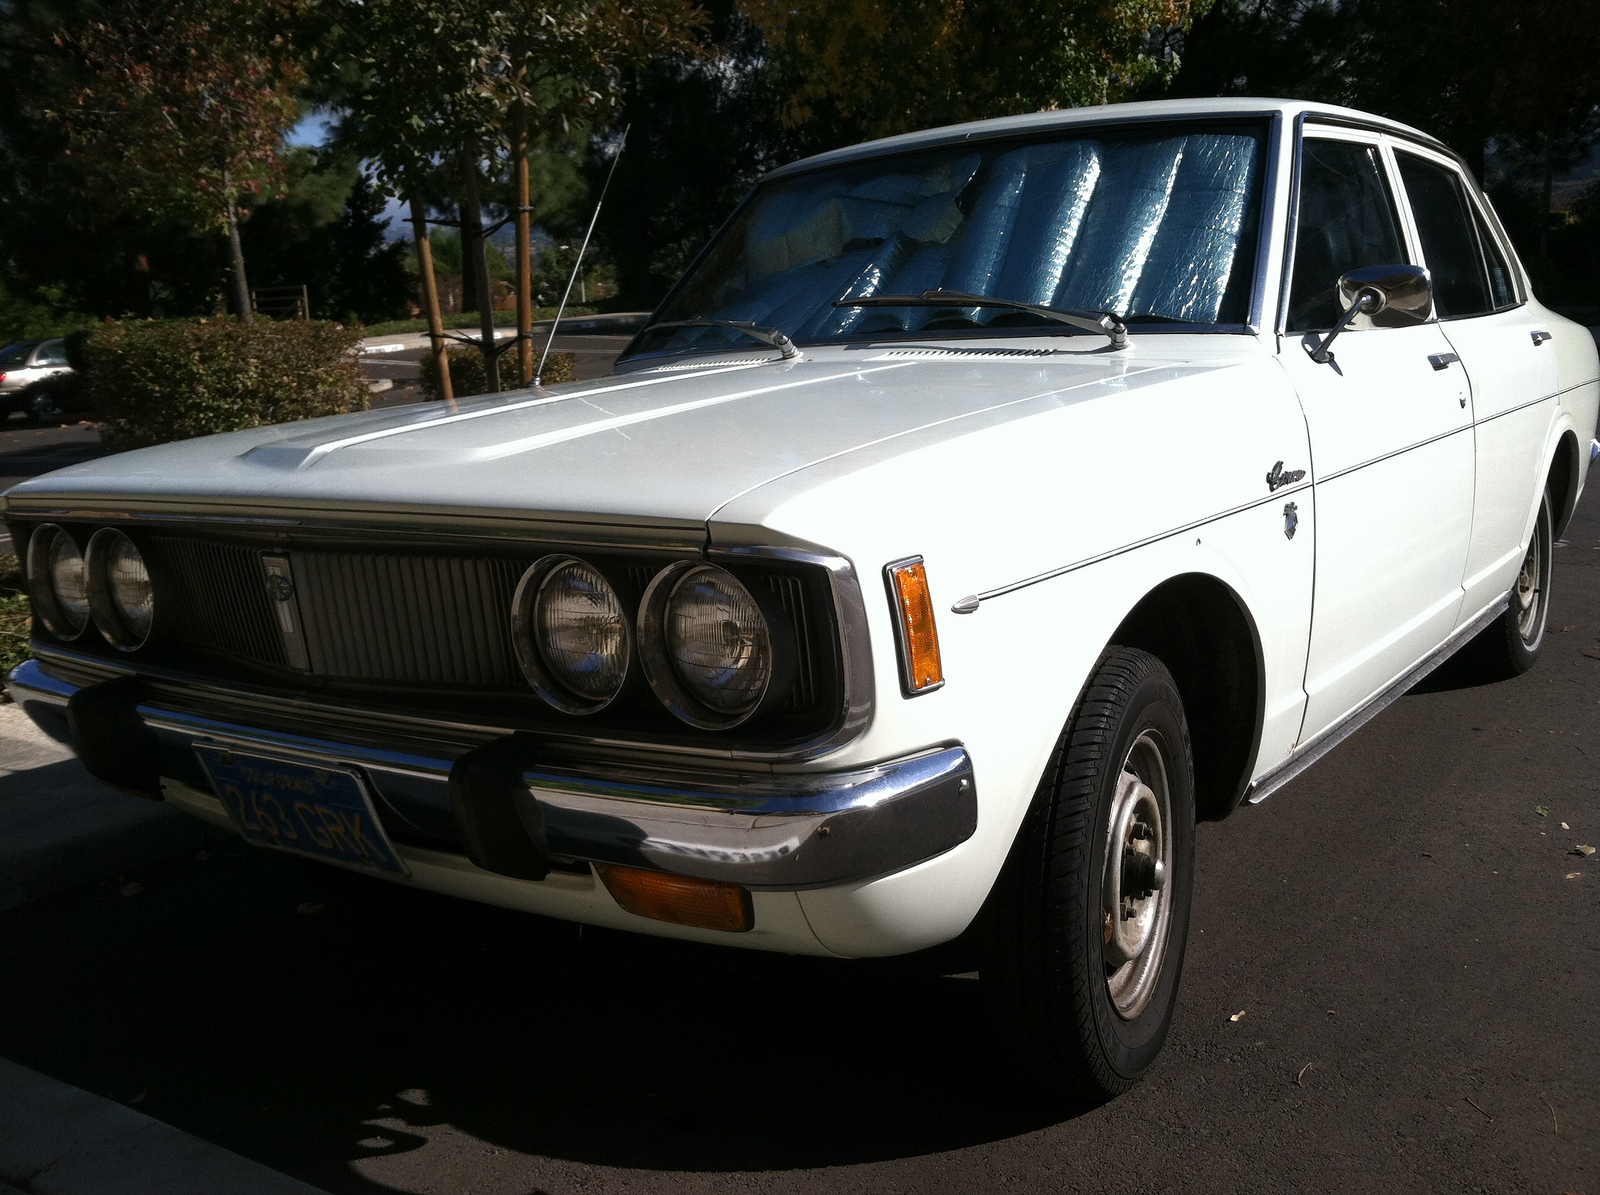 1972 Toyota Corona Deluxe Automatic | Flickr - Photo Sharing!